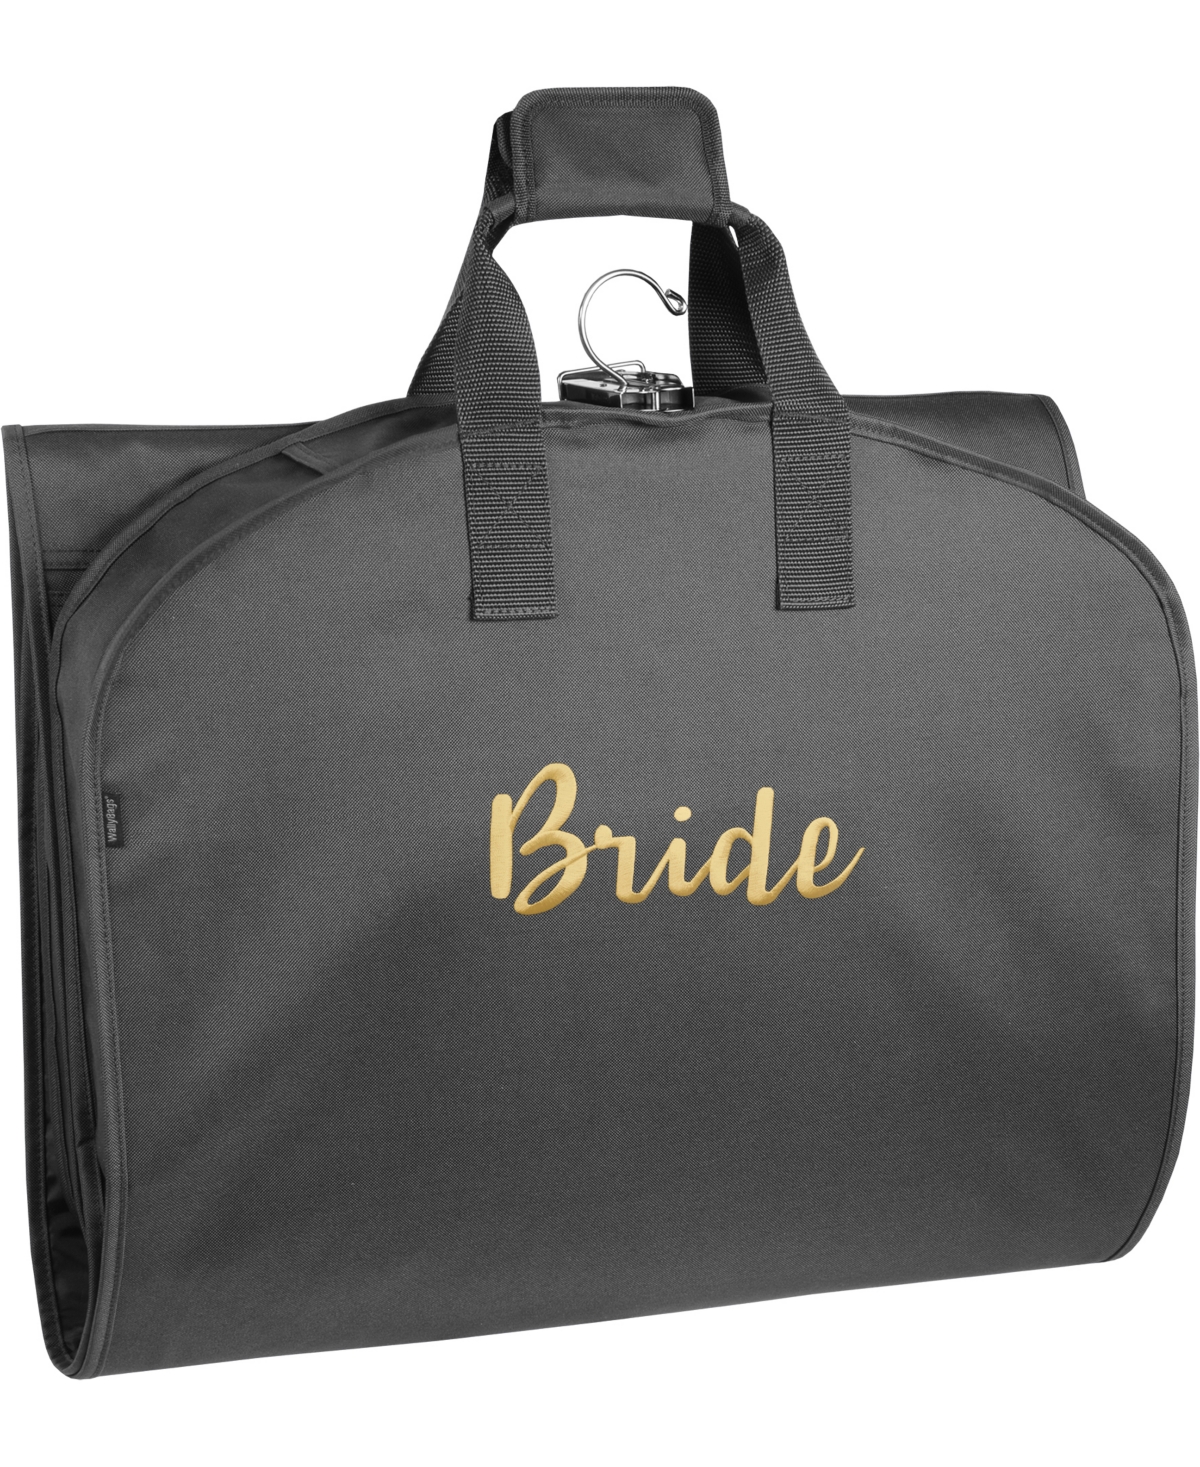 Wallybags 60" Premium Tri-fold Travel Garment Bag With Pocket And Bride Embroidery In Black - B Gold